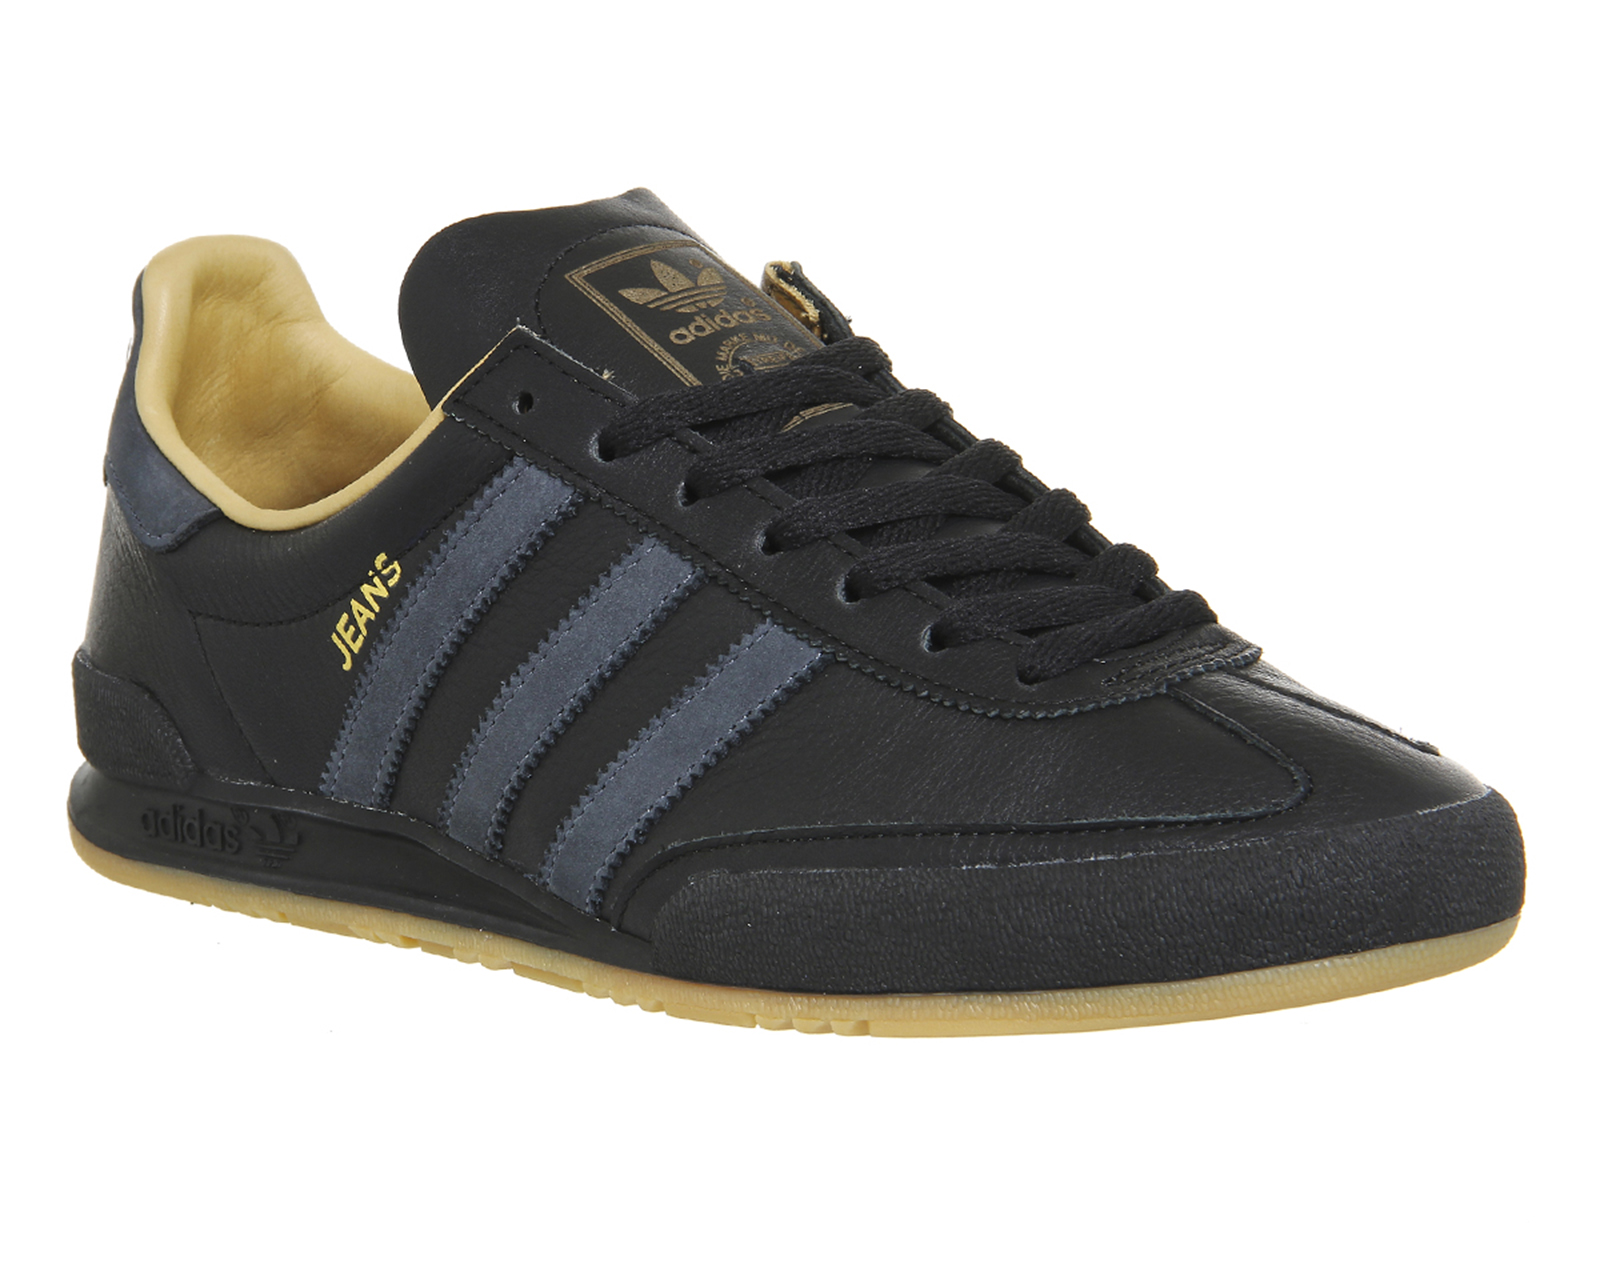 adidas Jeans Black Onix Gum - His trainers